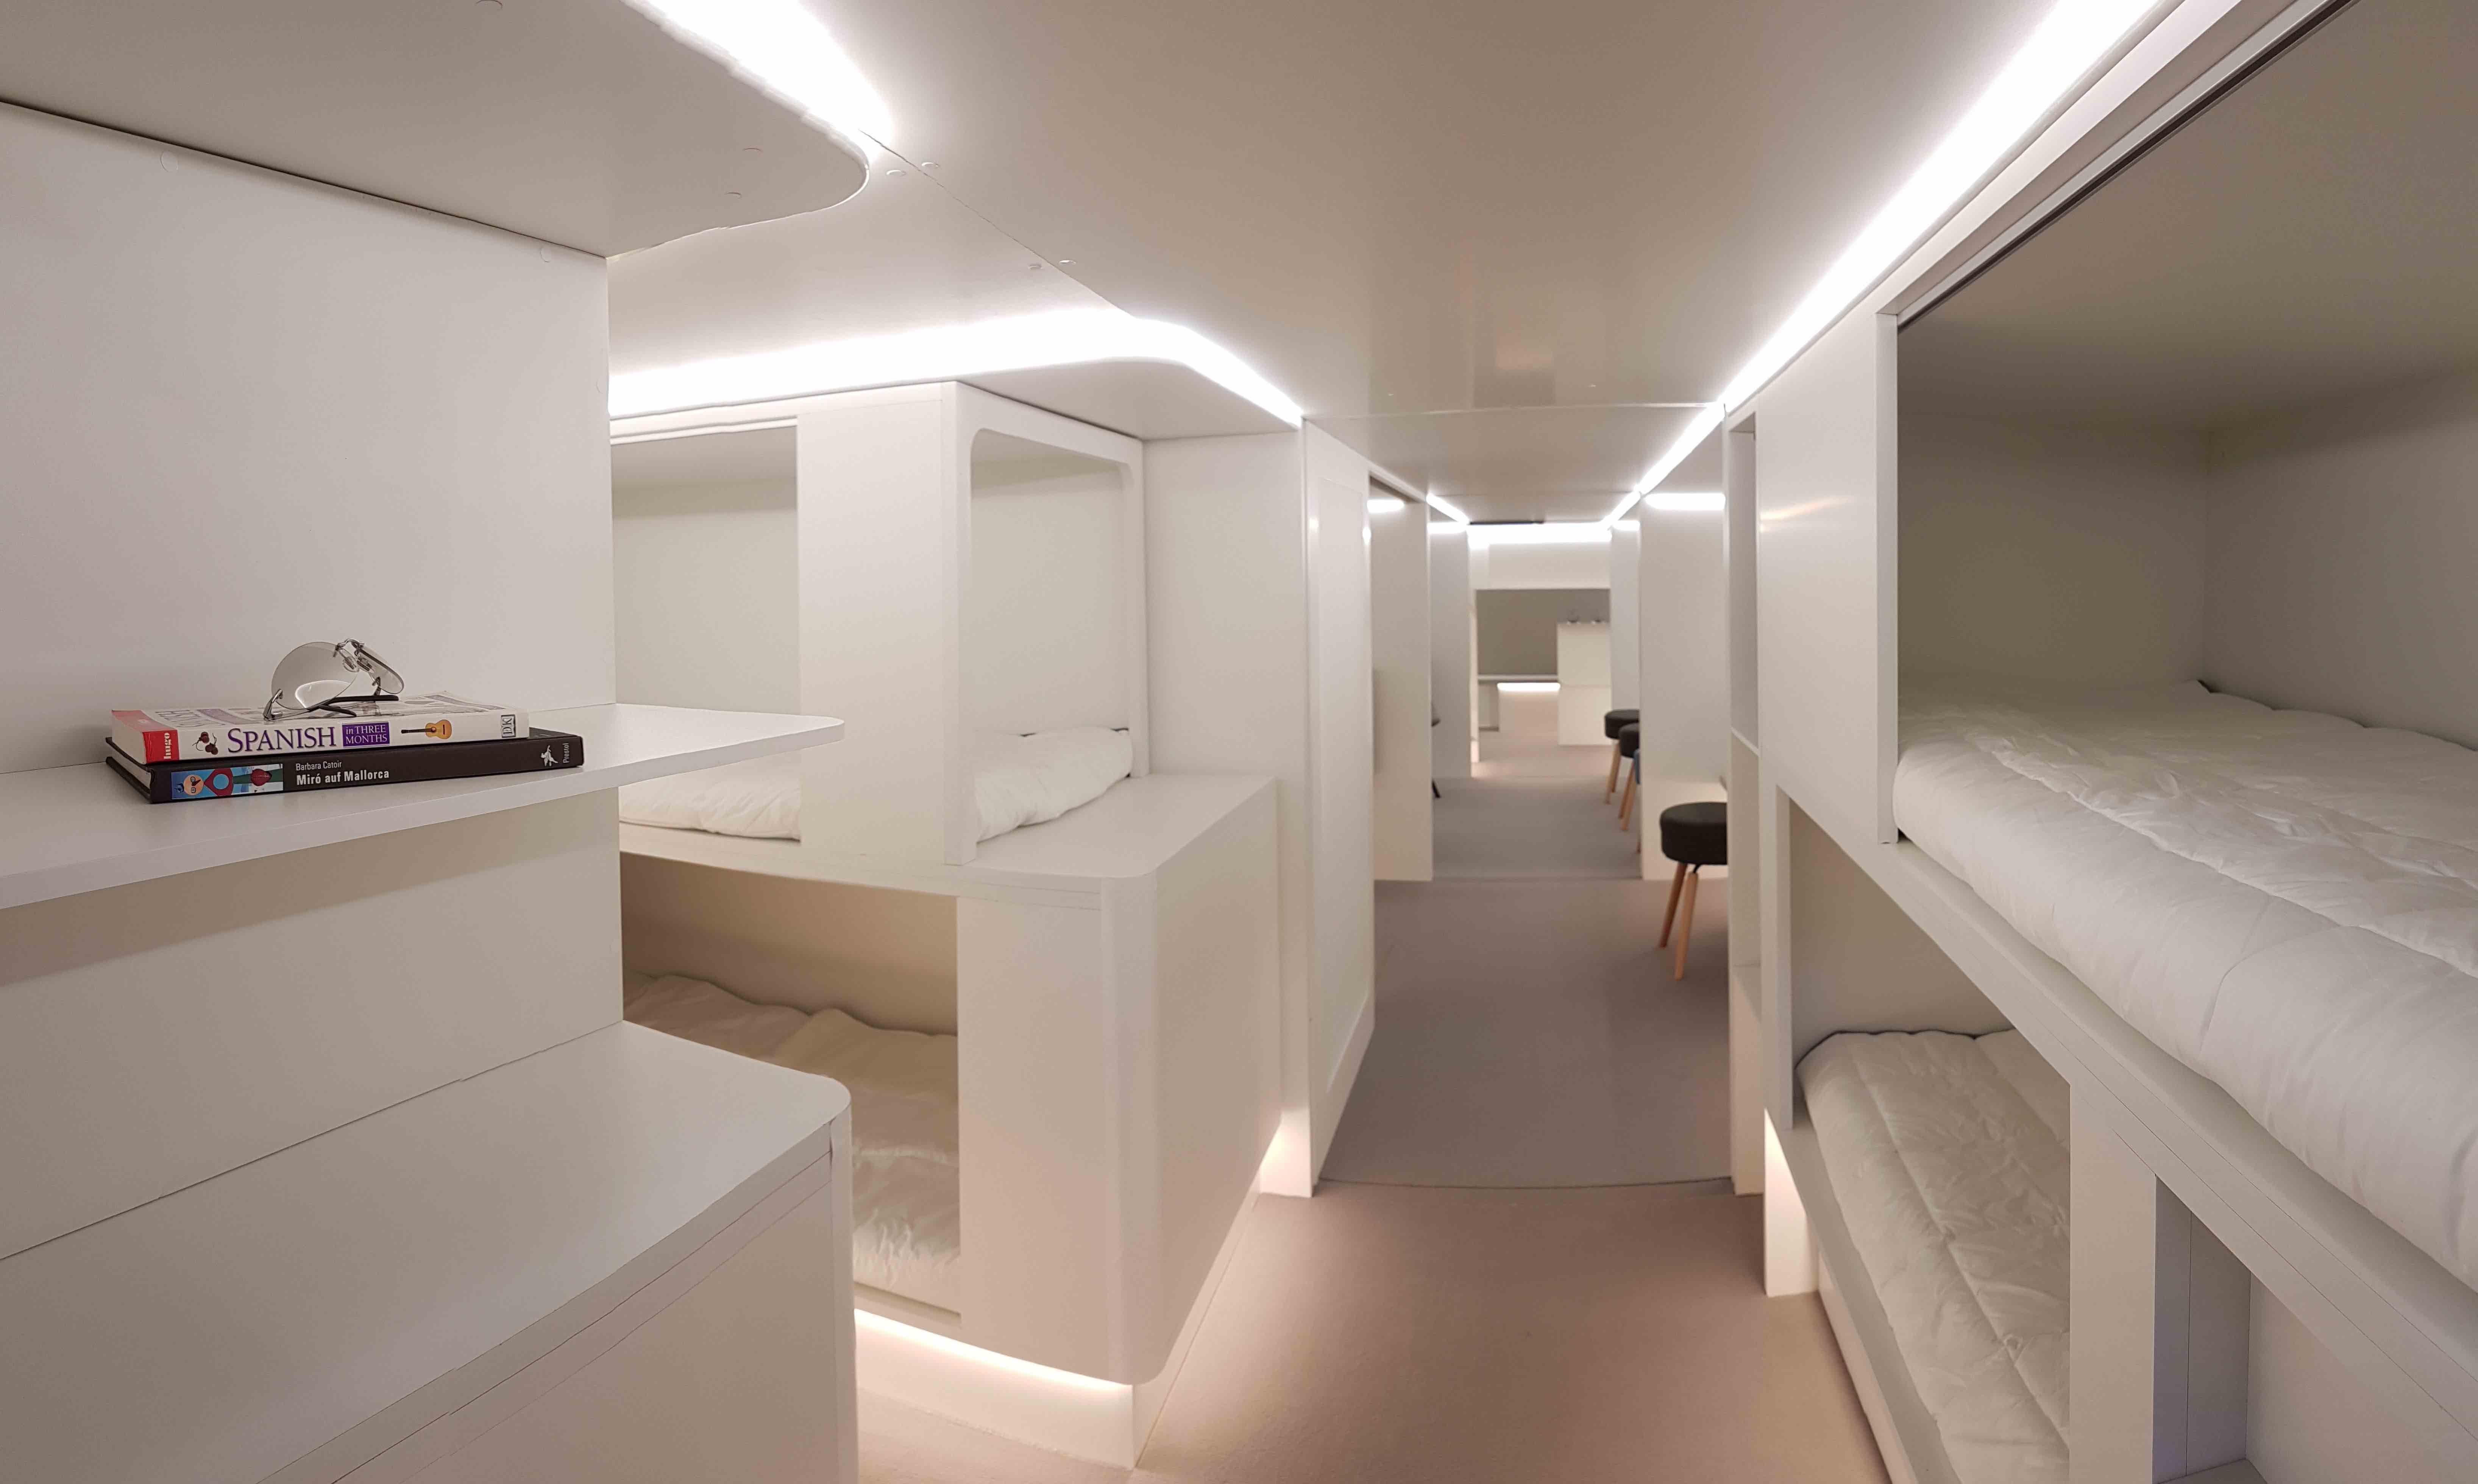 Qantas Chooses Onboard Gym Over Sleeping Pods Live And Let S Fly